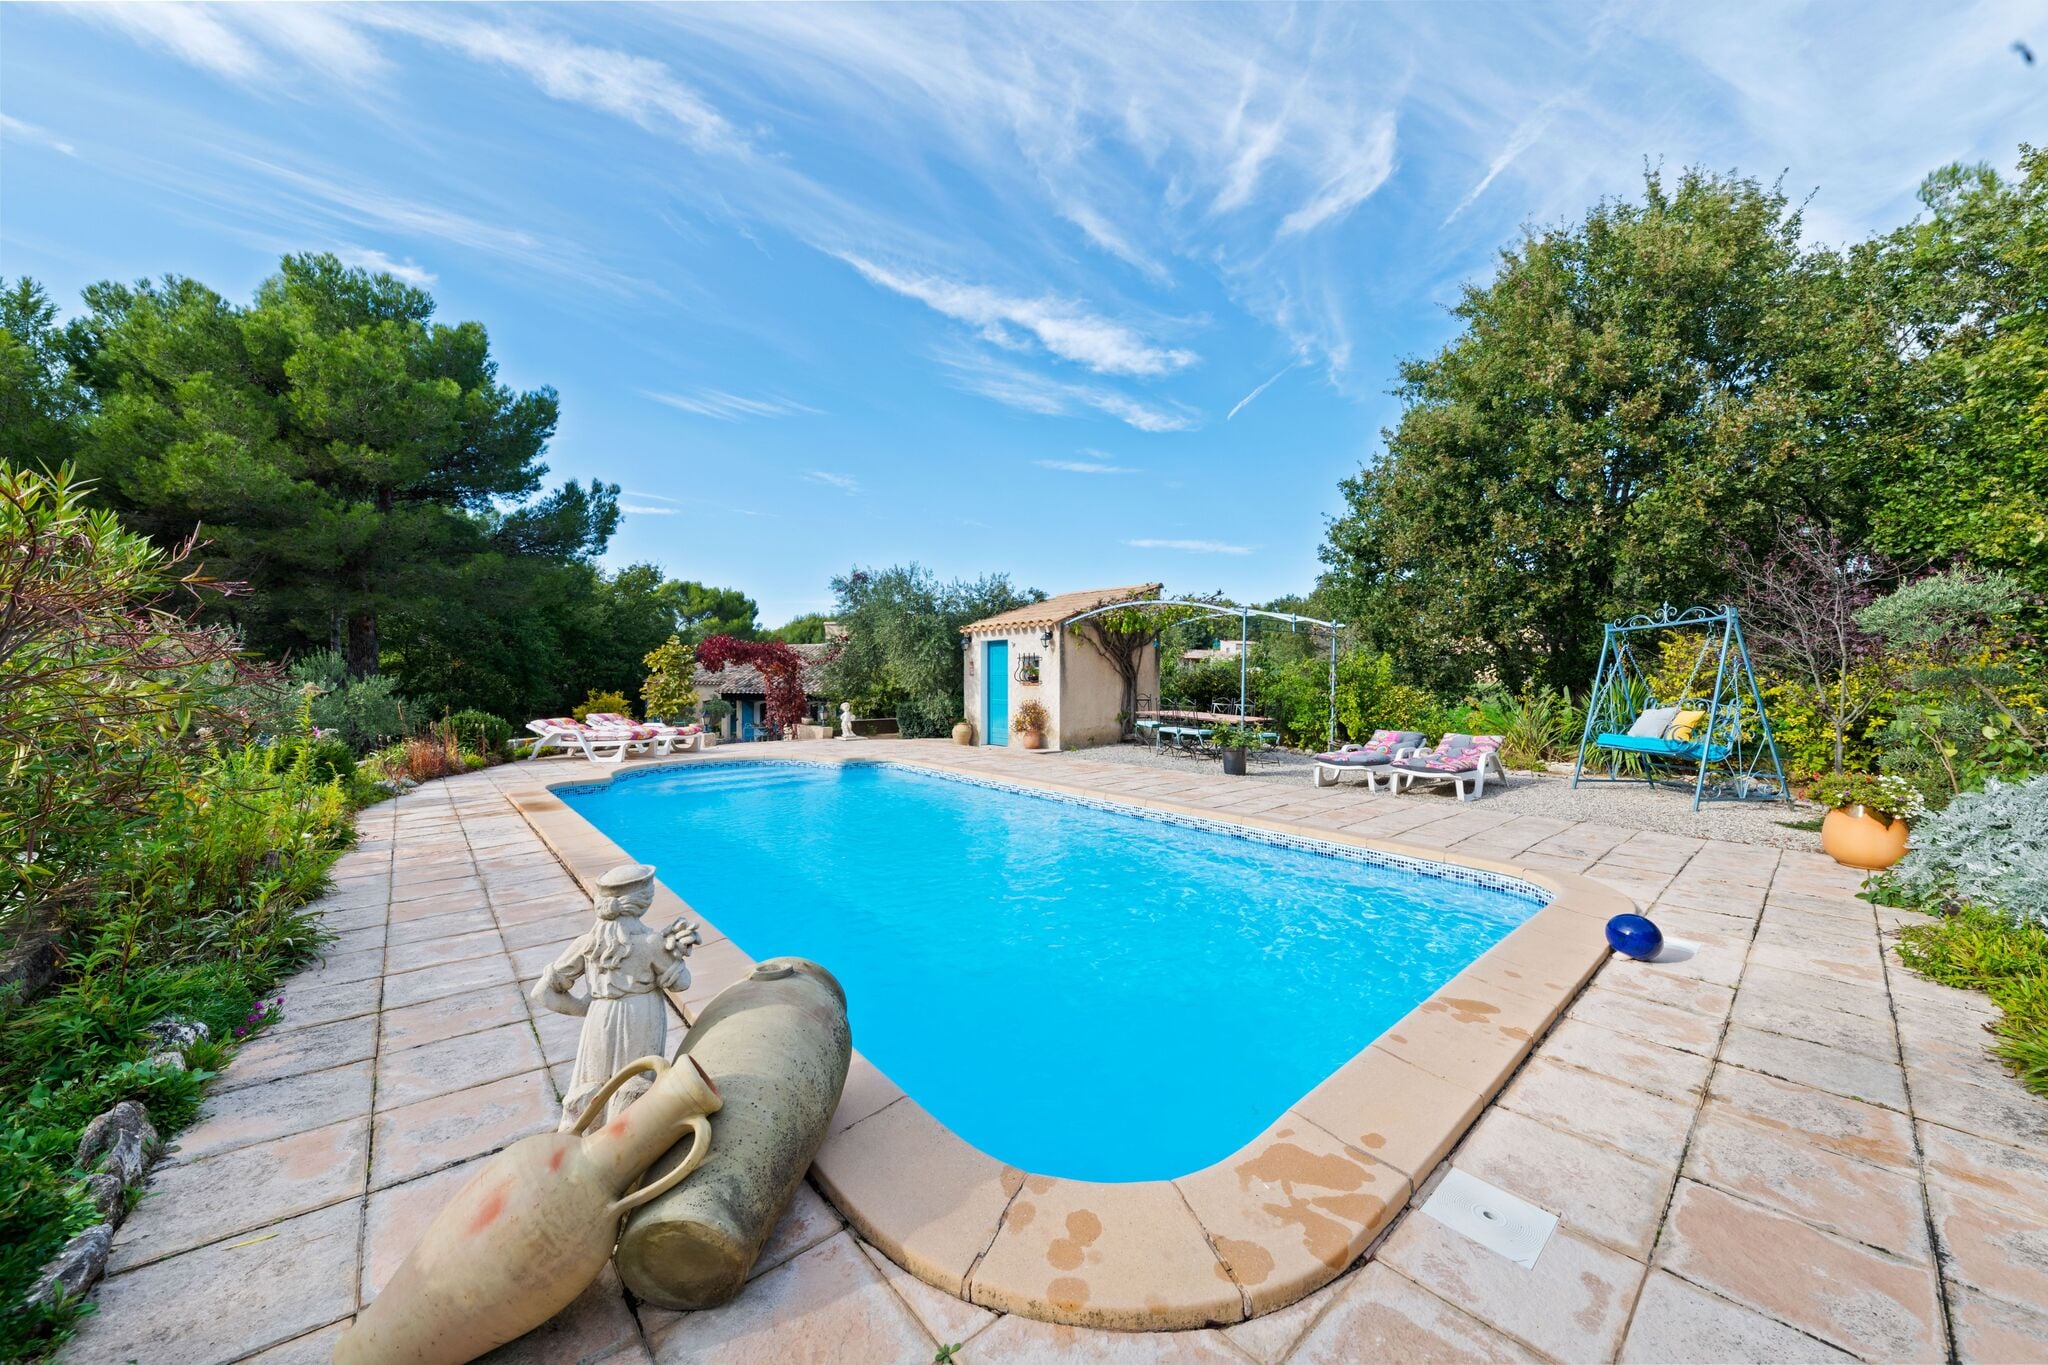 Tastefully furnished villa with terrace, private swimming pool near of Lambesc.